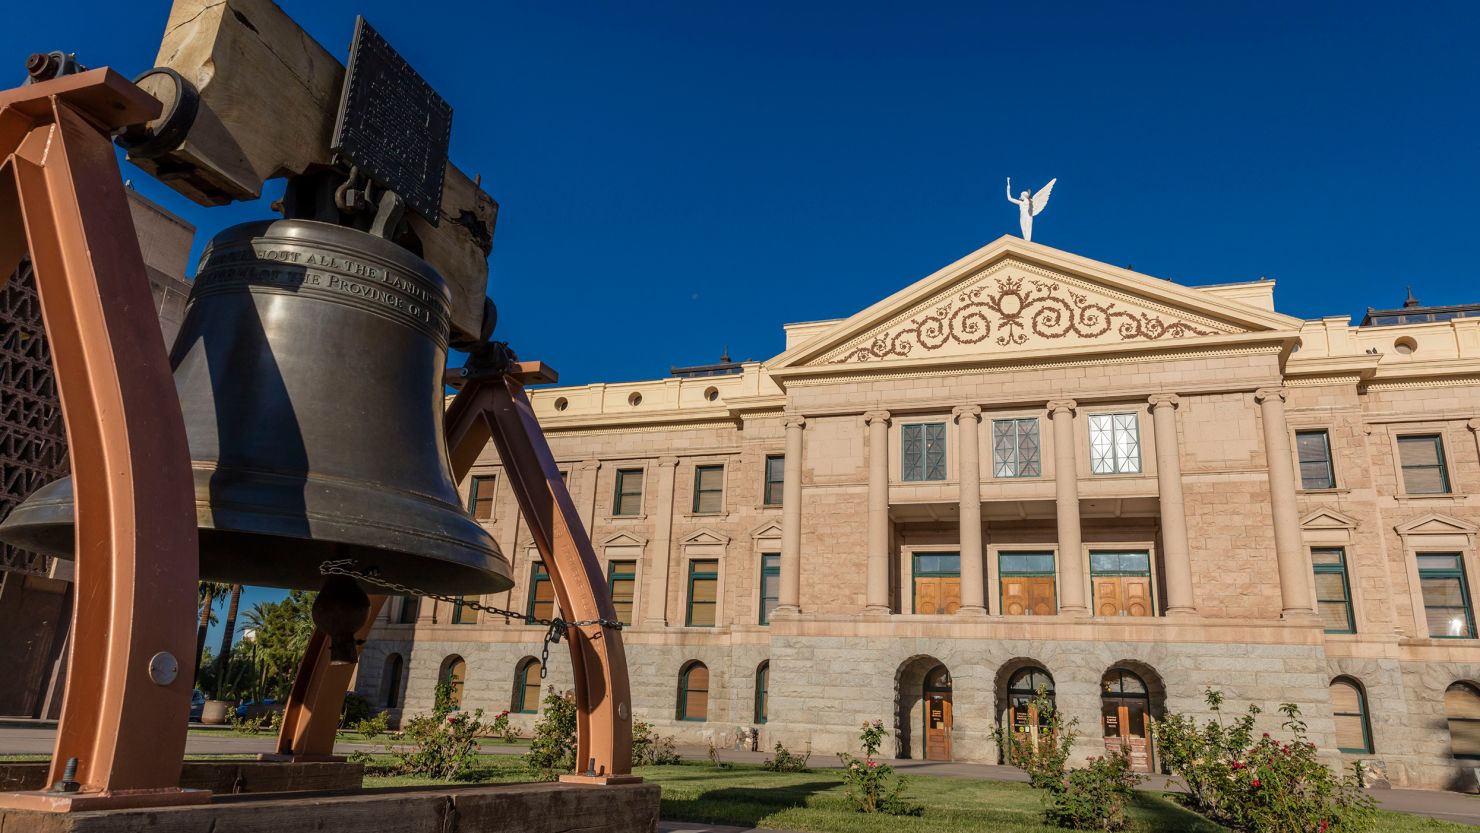 A replica of the Liberty Bell in front of the Arizona State Capitol Building.